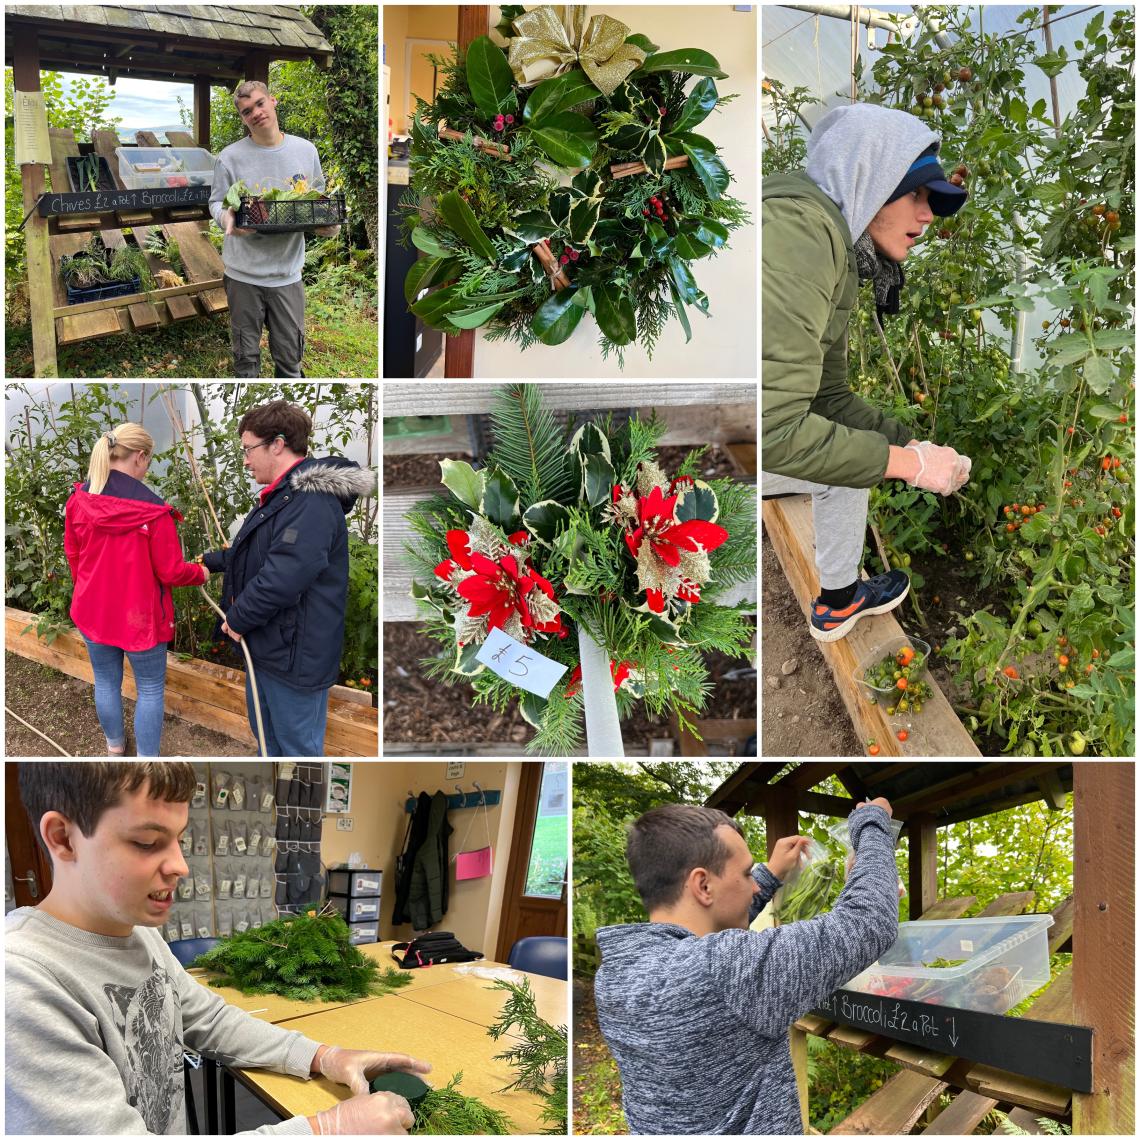 A collage of learners. 5 images holding a wreath, making wreaths, watering plants. 2 images of wreaths.